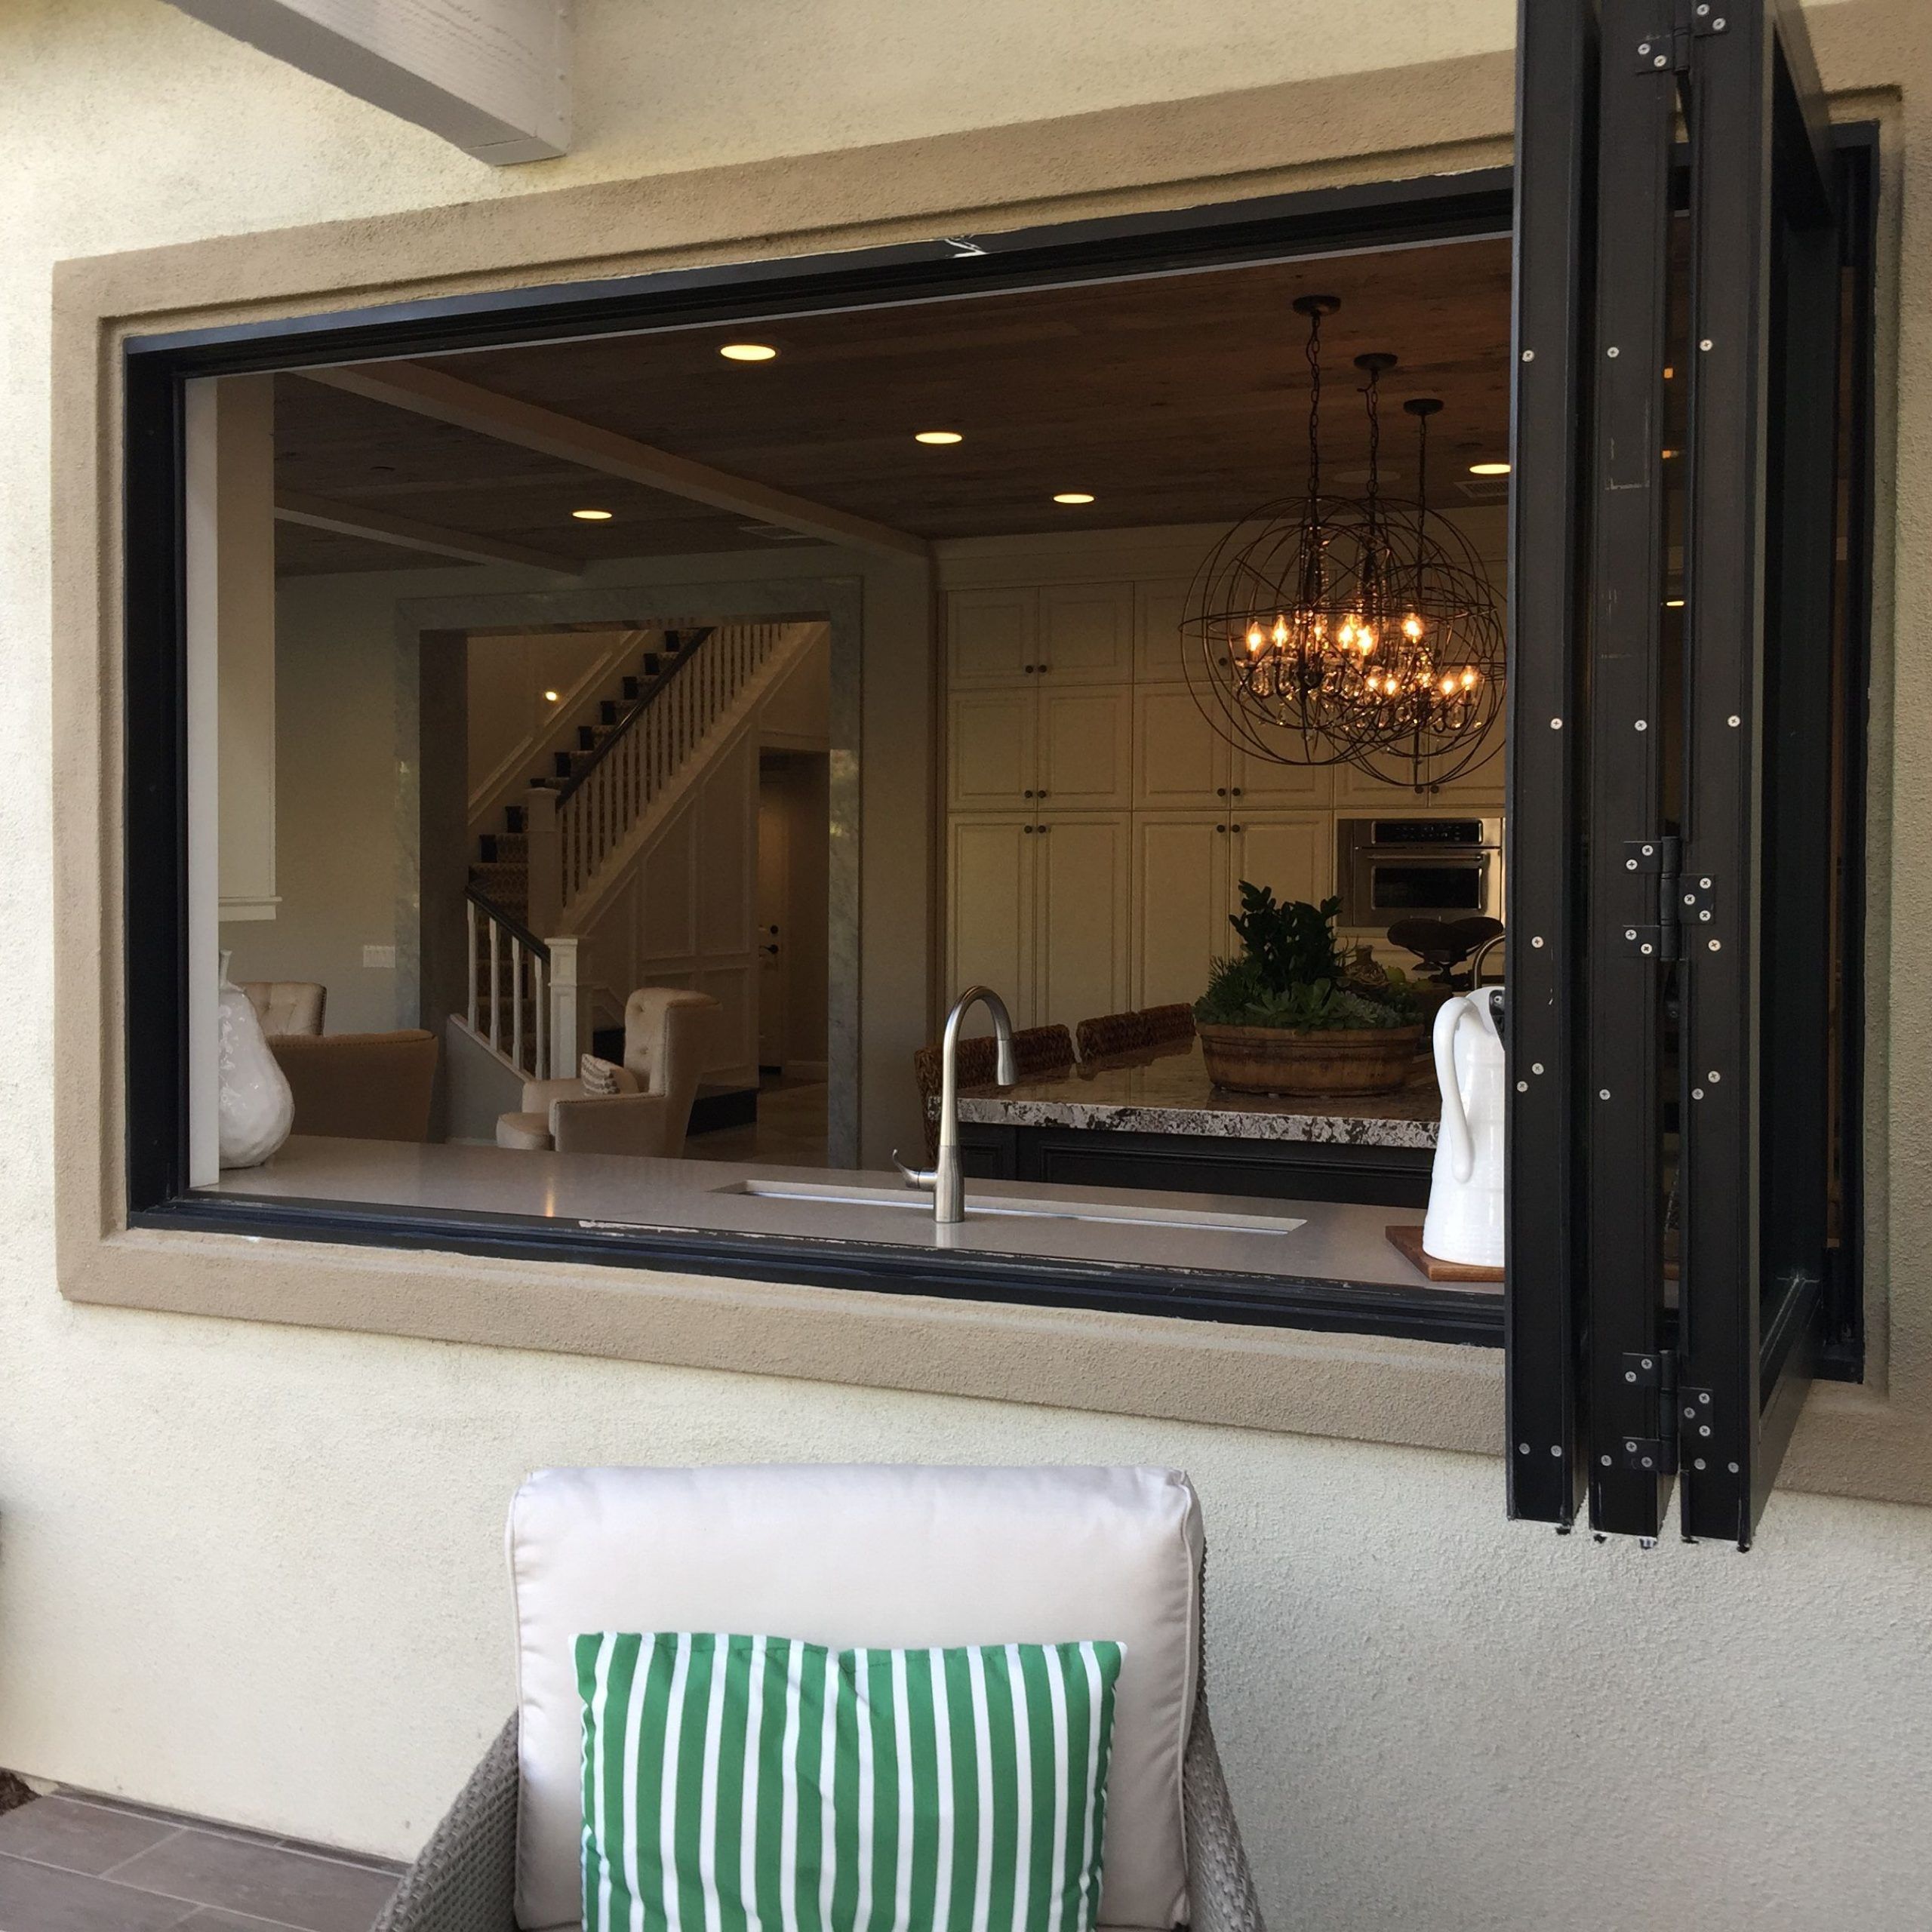 Pinjulie Mossy On Owen And Vanessa's Remodel | Mirror, Home Decor Intended For Owens Accent Mirrors (View 15 of 15)